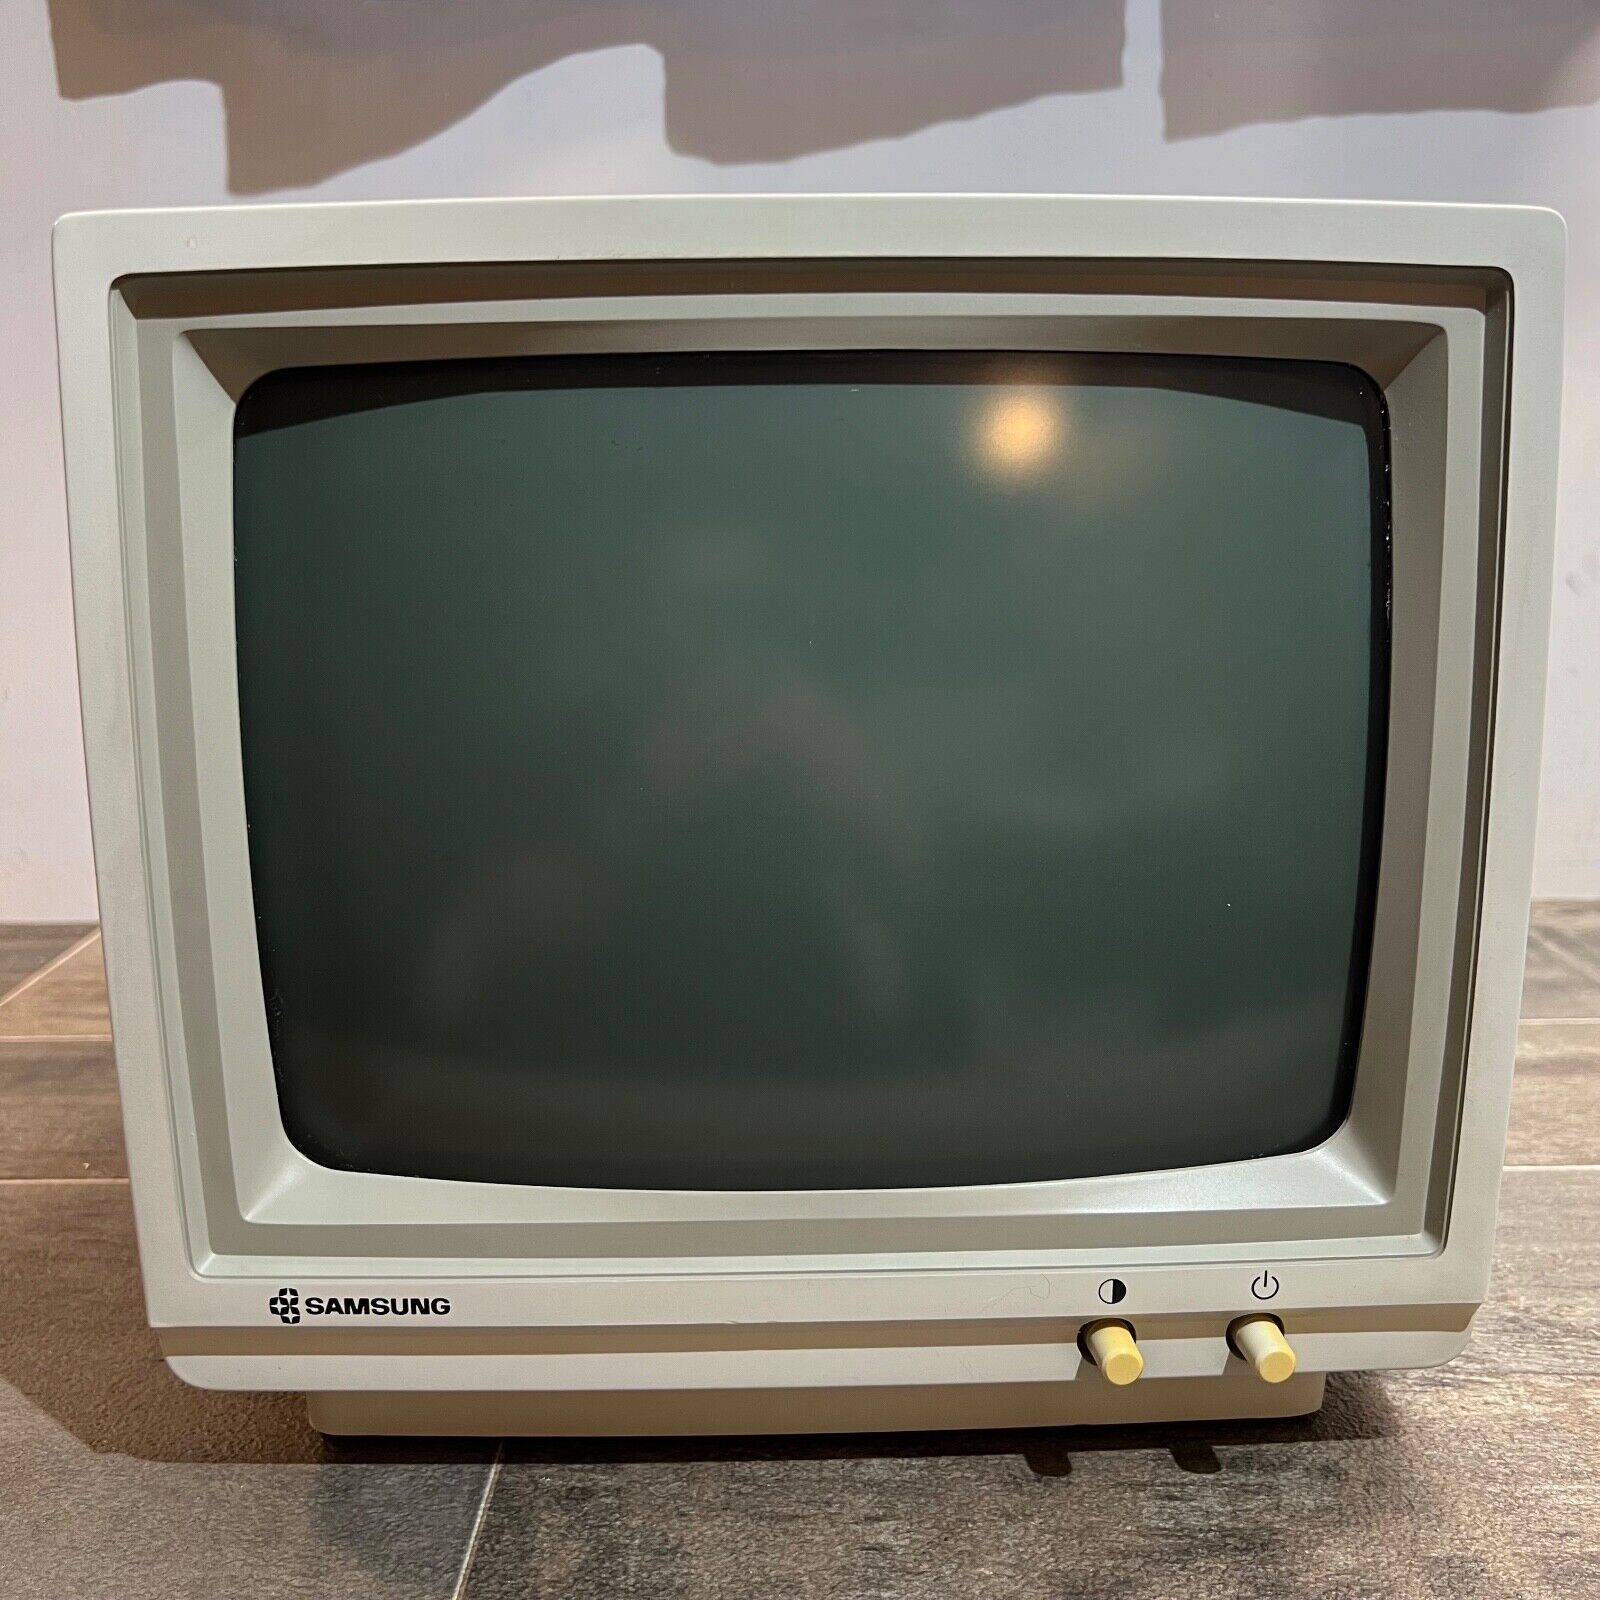 Vintage Samsung Computer Display, MD-1255H, 1984 Dated, Made in Korea